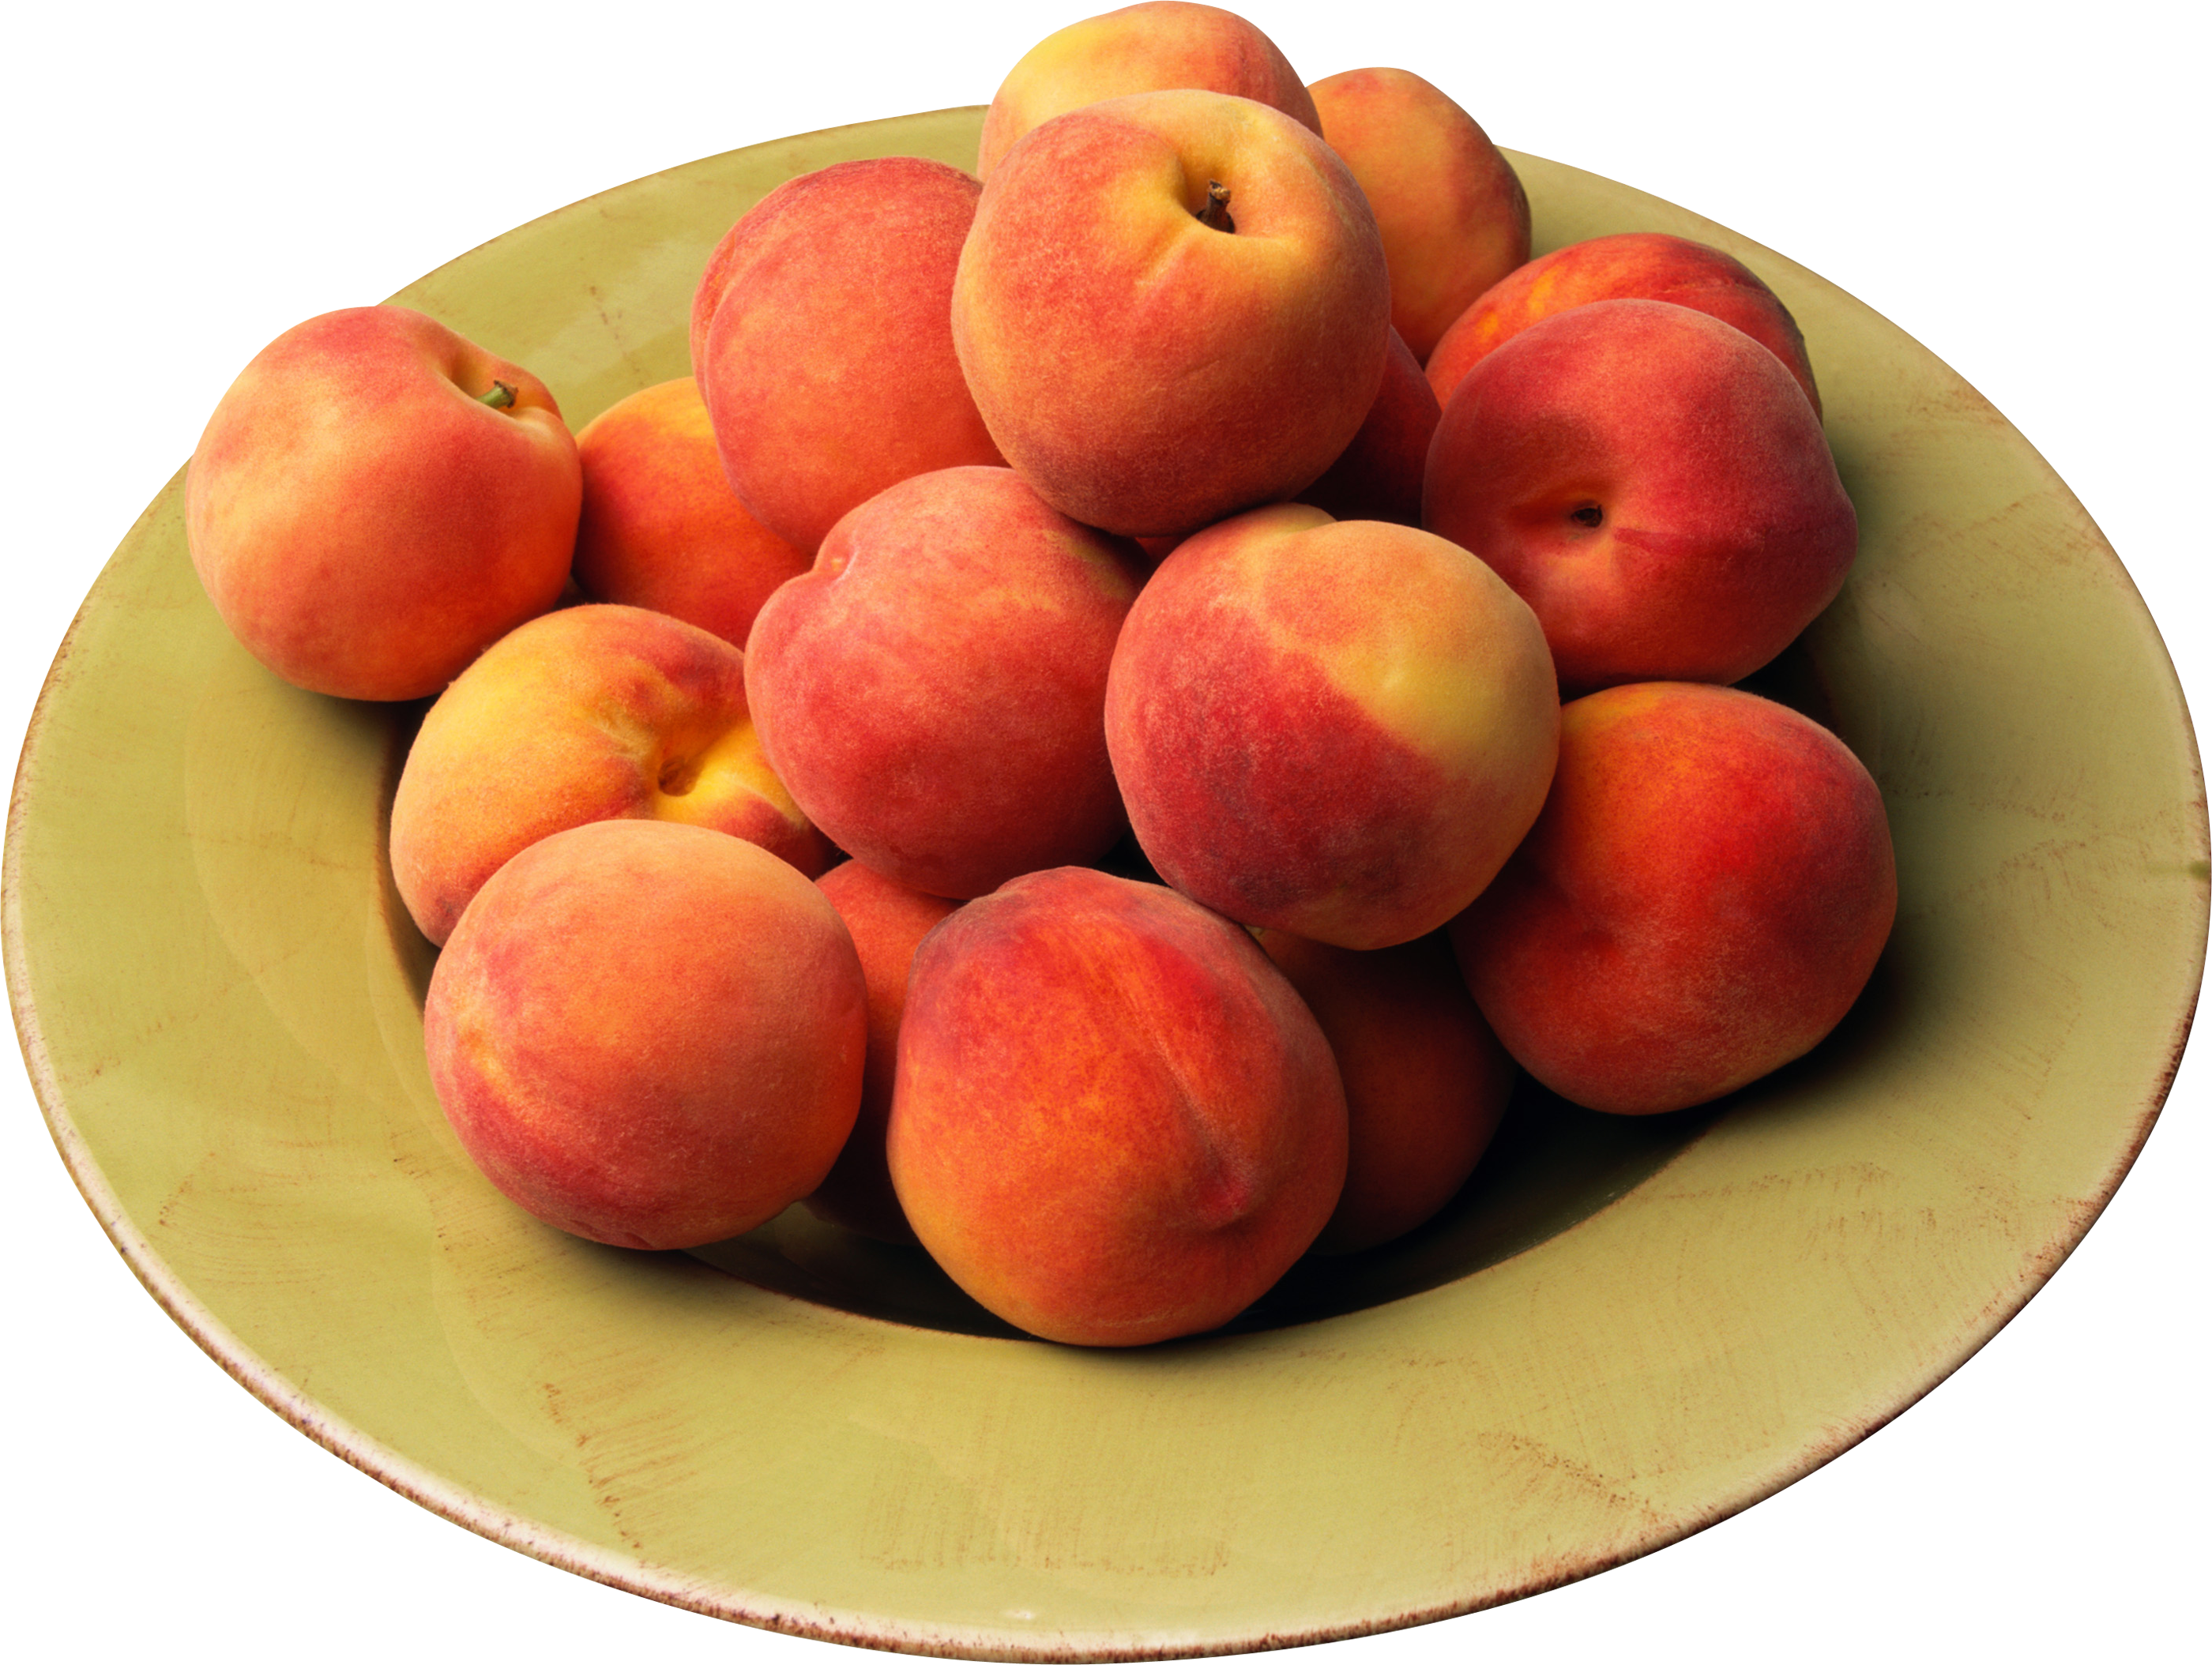 Peaches on a plate PNG Image